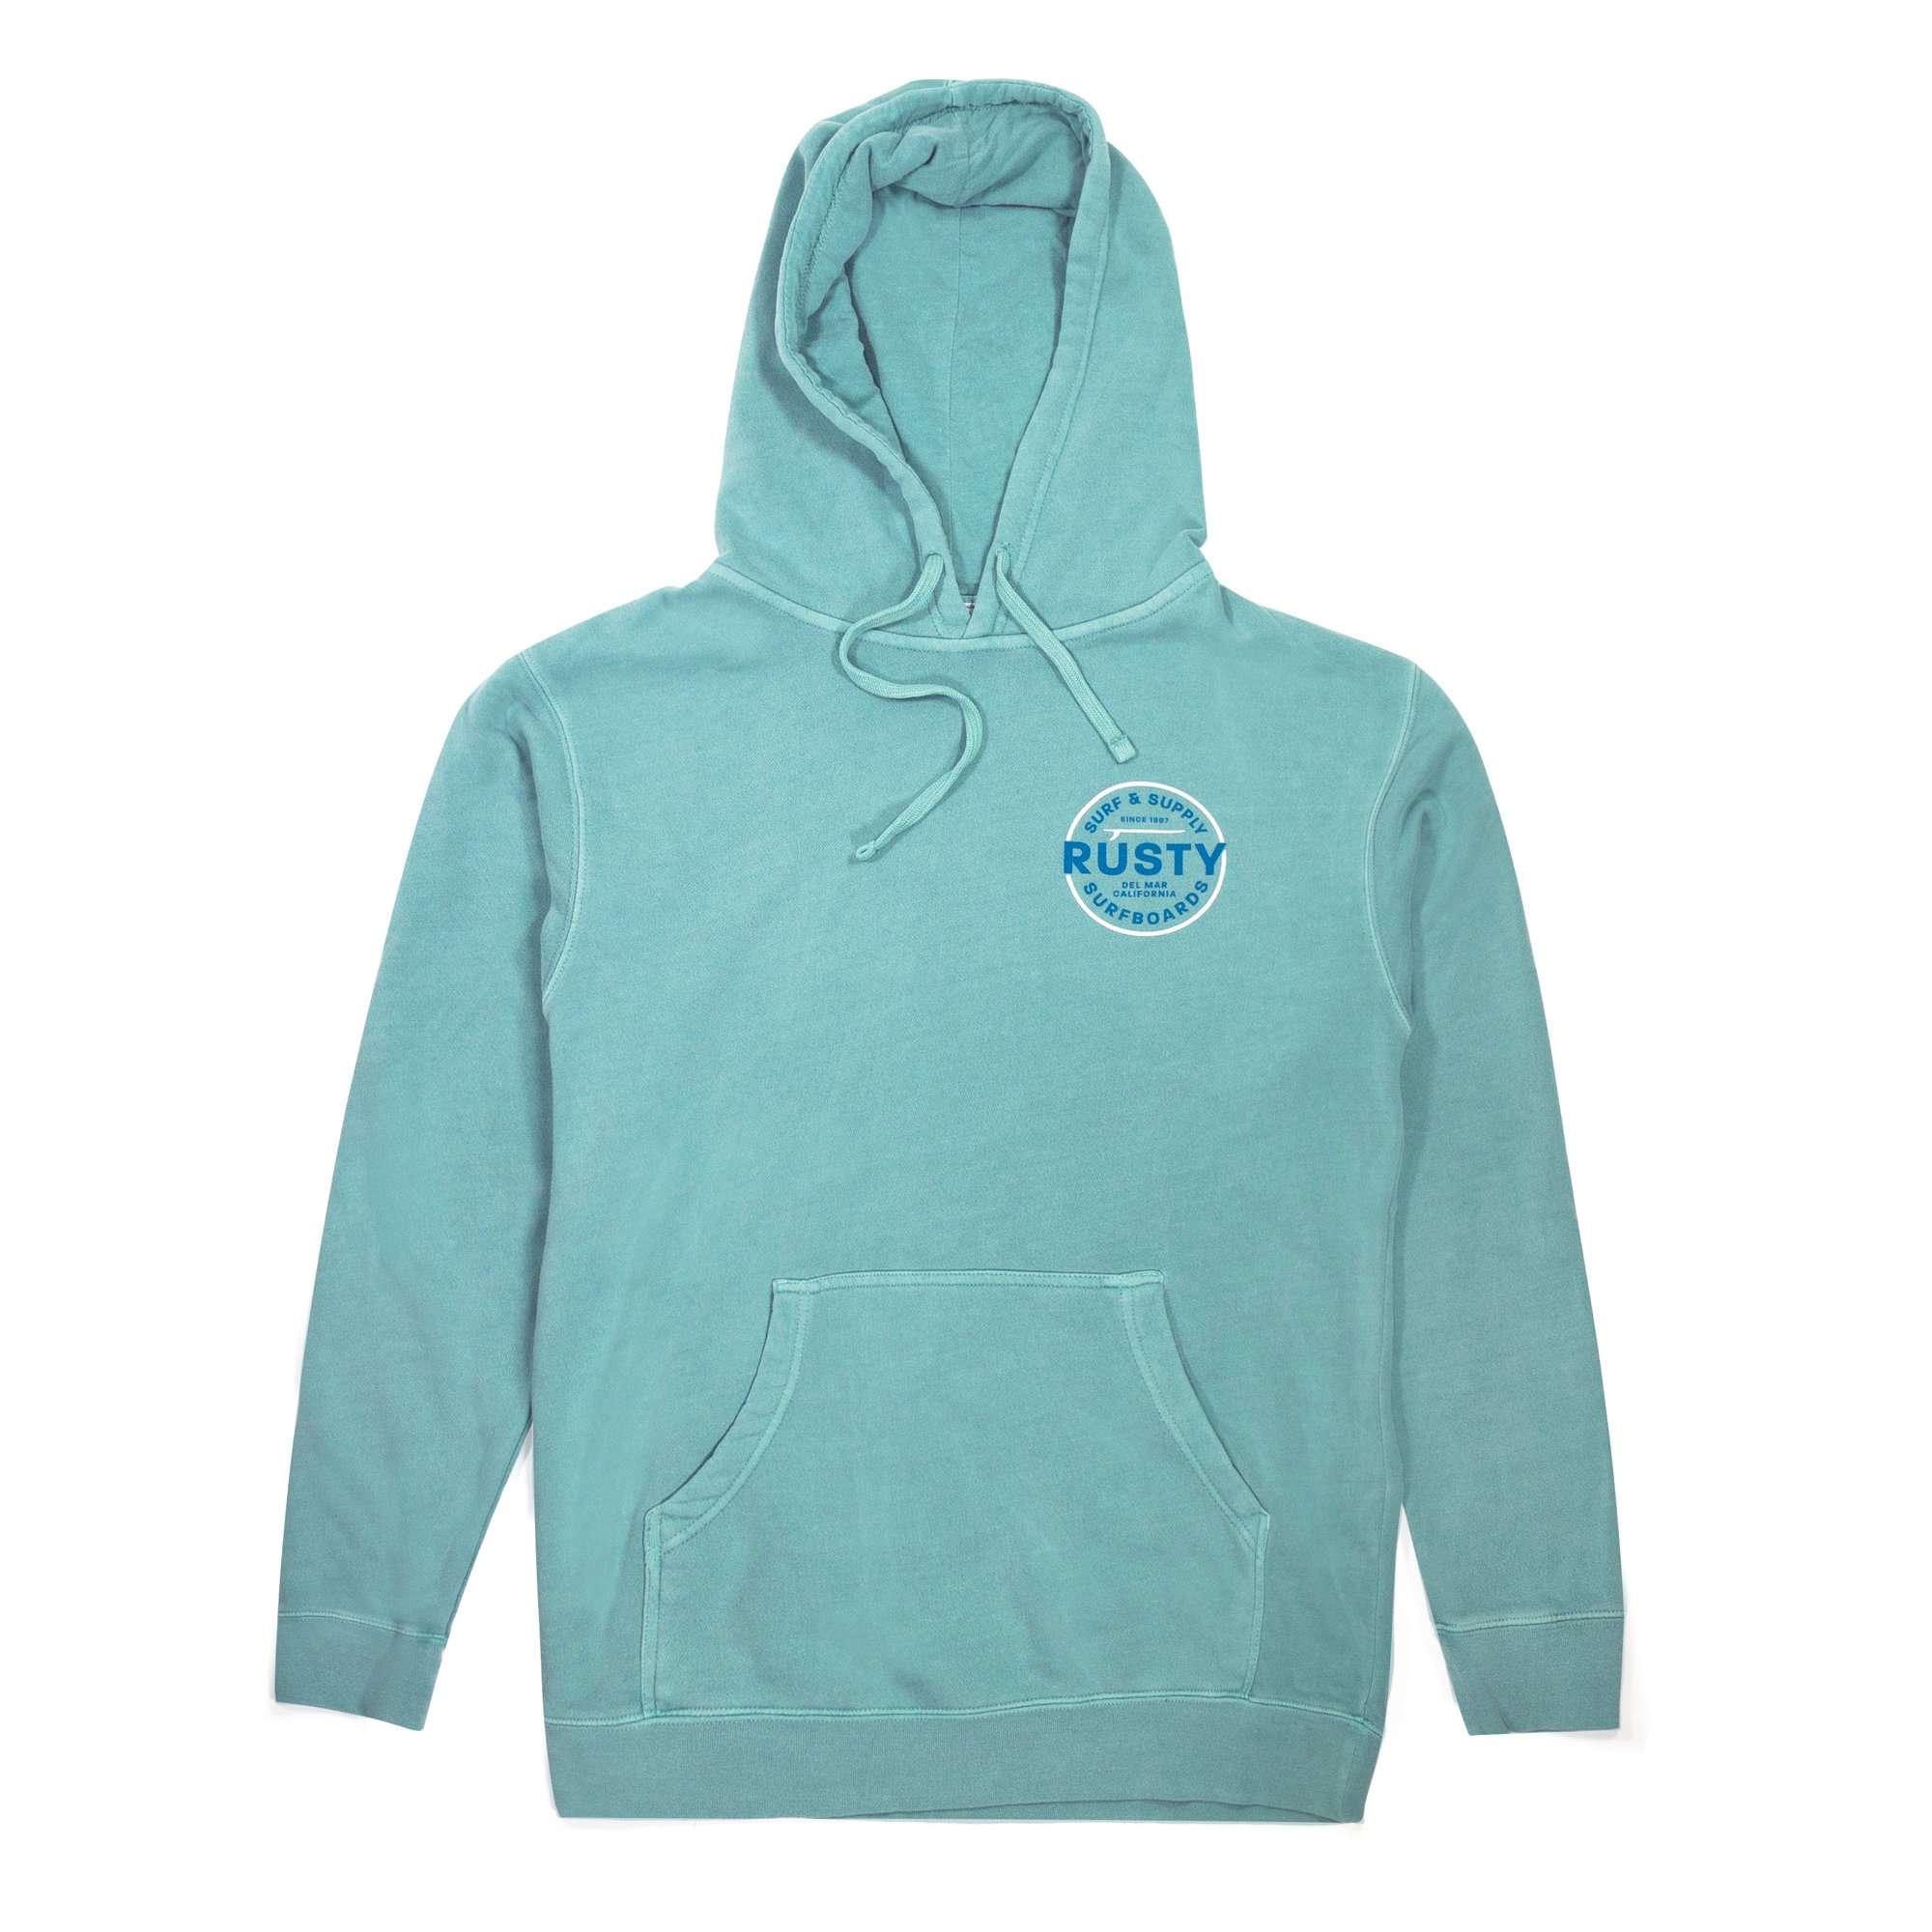 Surf and Supply Circle Pull Over Sweatshirt - Rusty Del Mar